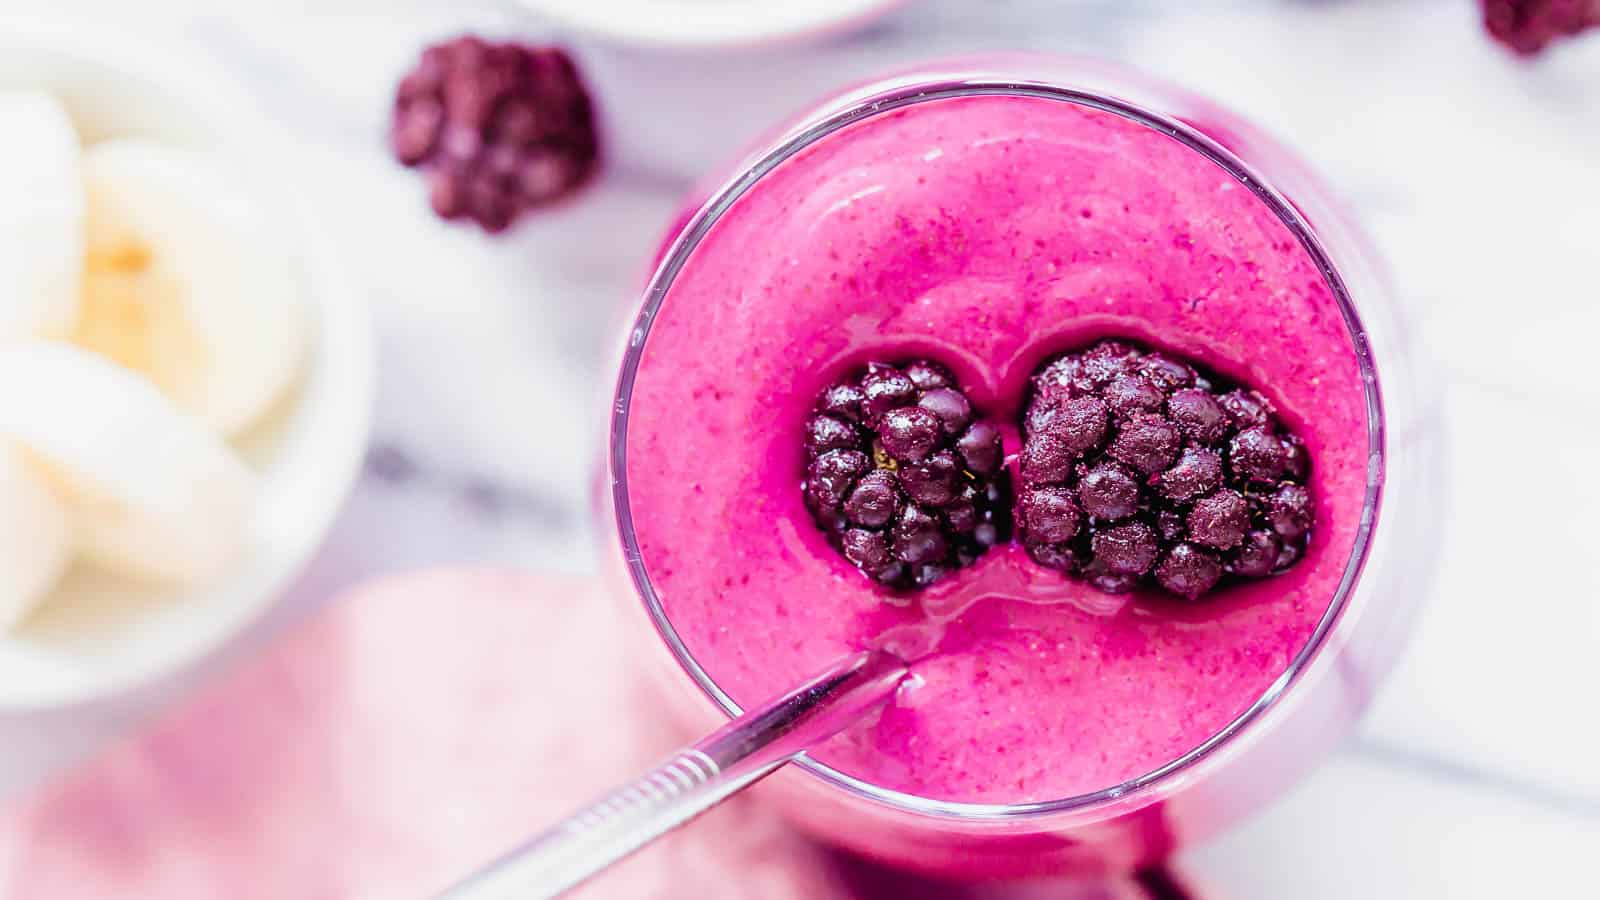 Blackberry smoothie recipe in a glass topped with frozen blackberries.